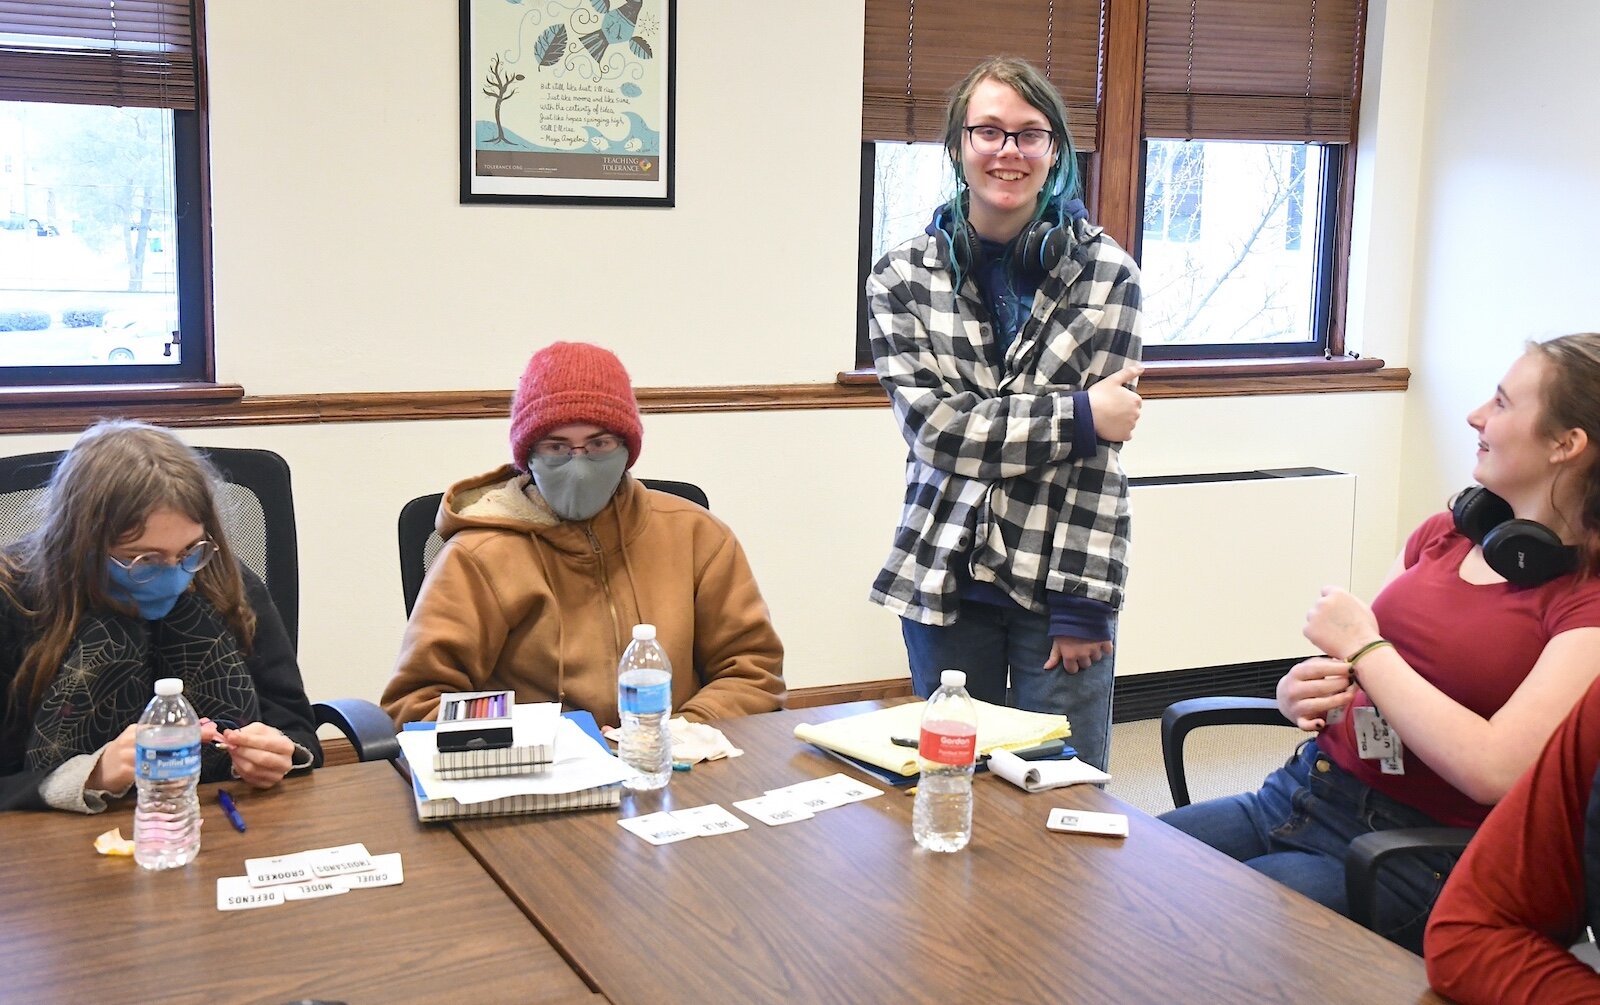 Voices of Youth Battle Creek students met in March to prepare their projects.From left to right: Kai Stevens, Logan Stevens, Athena McCarthy, and Lila McCarthy.